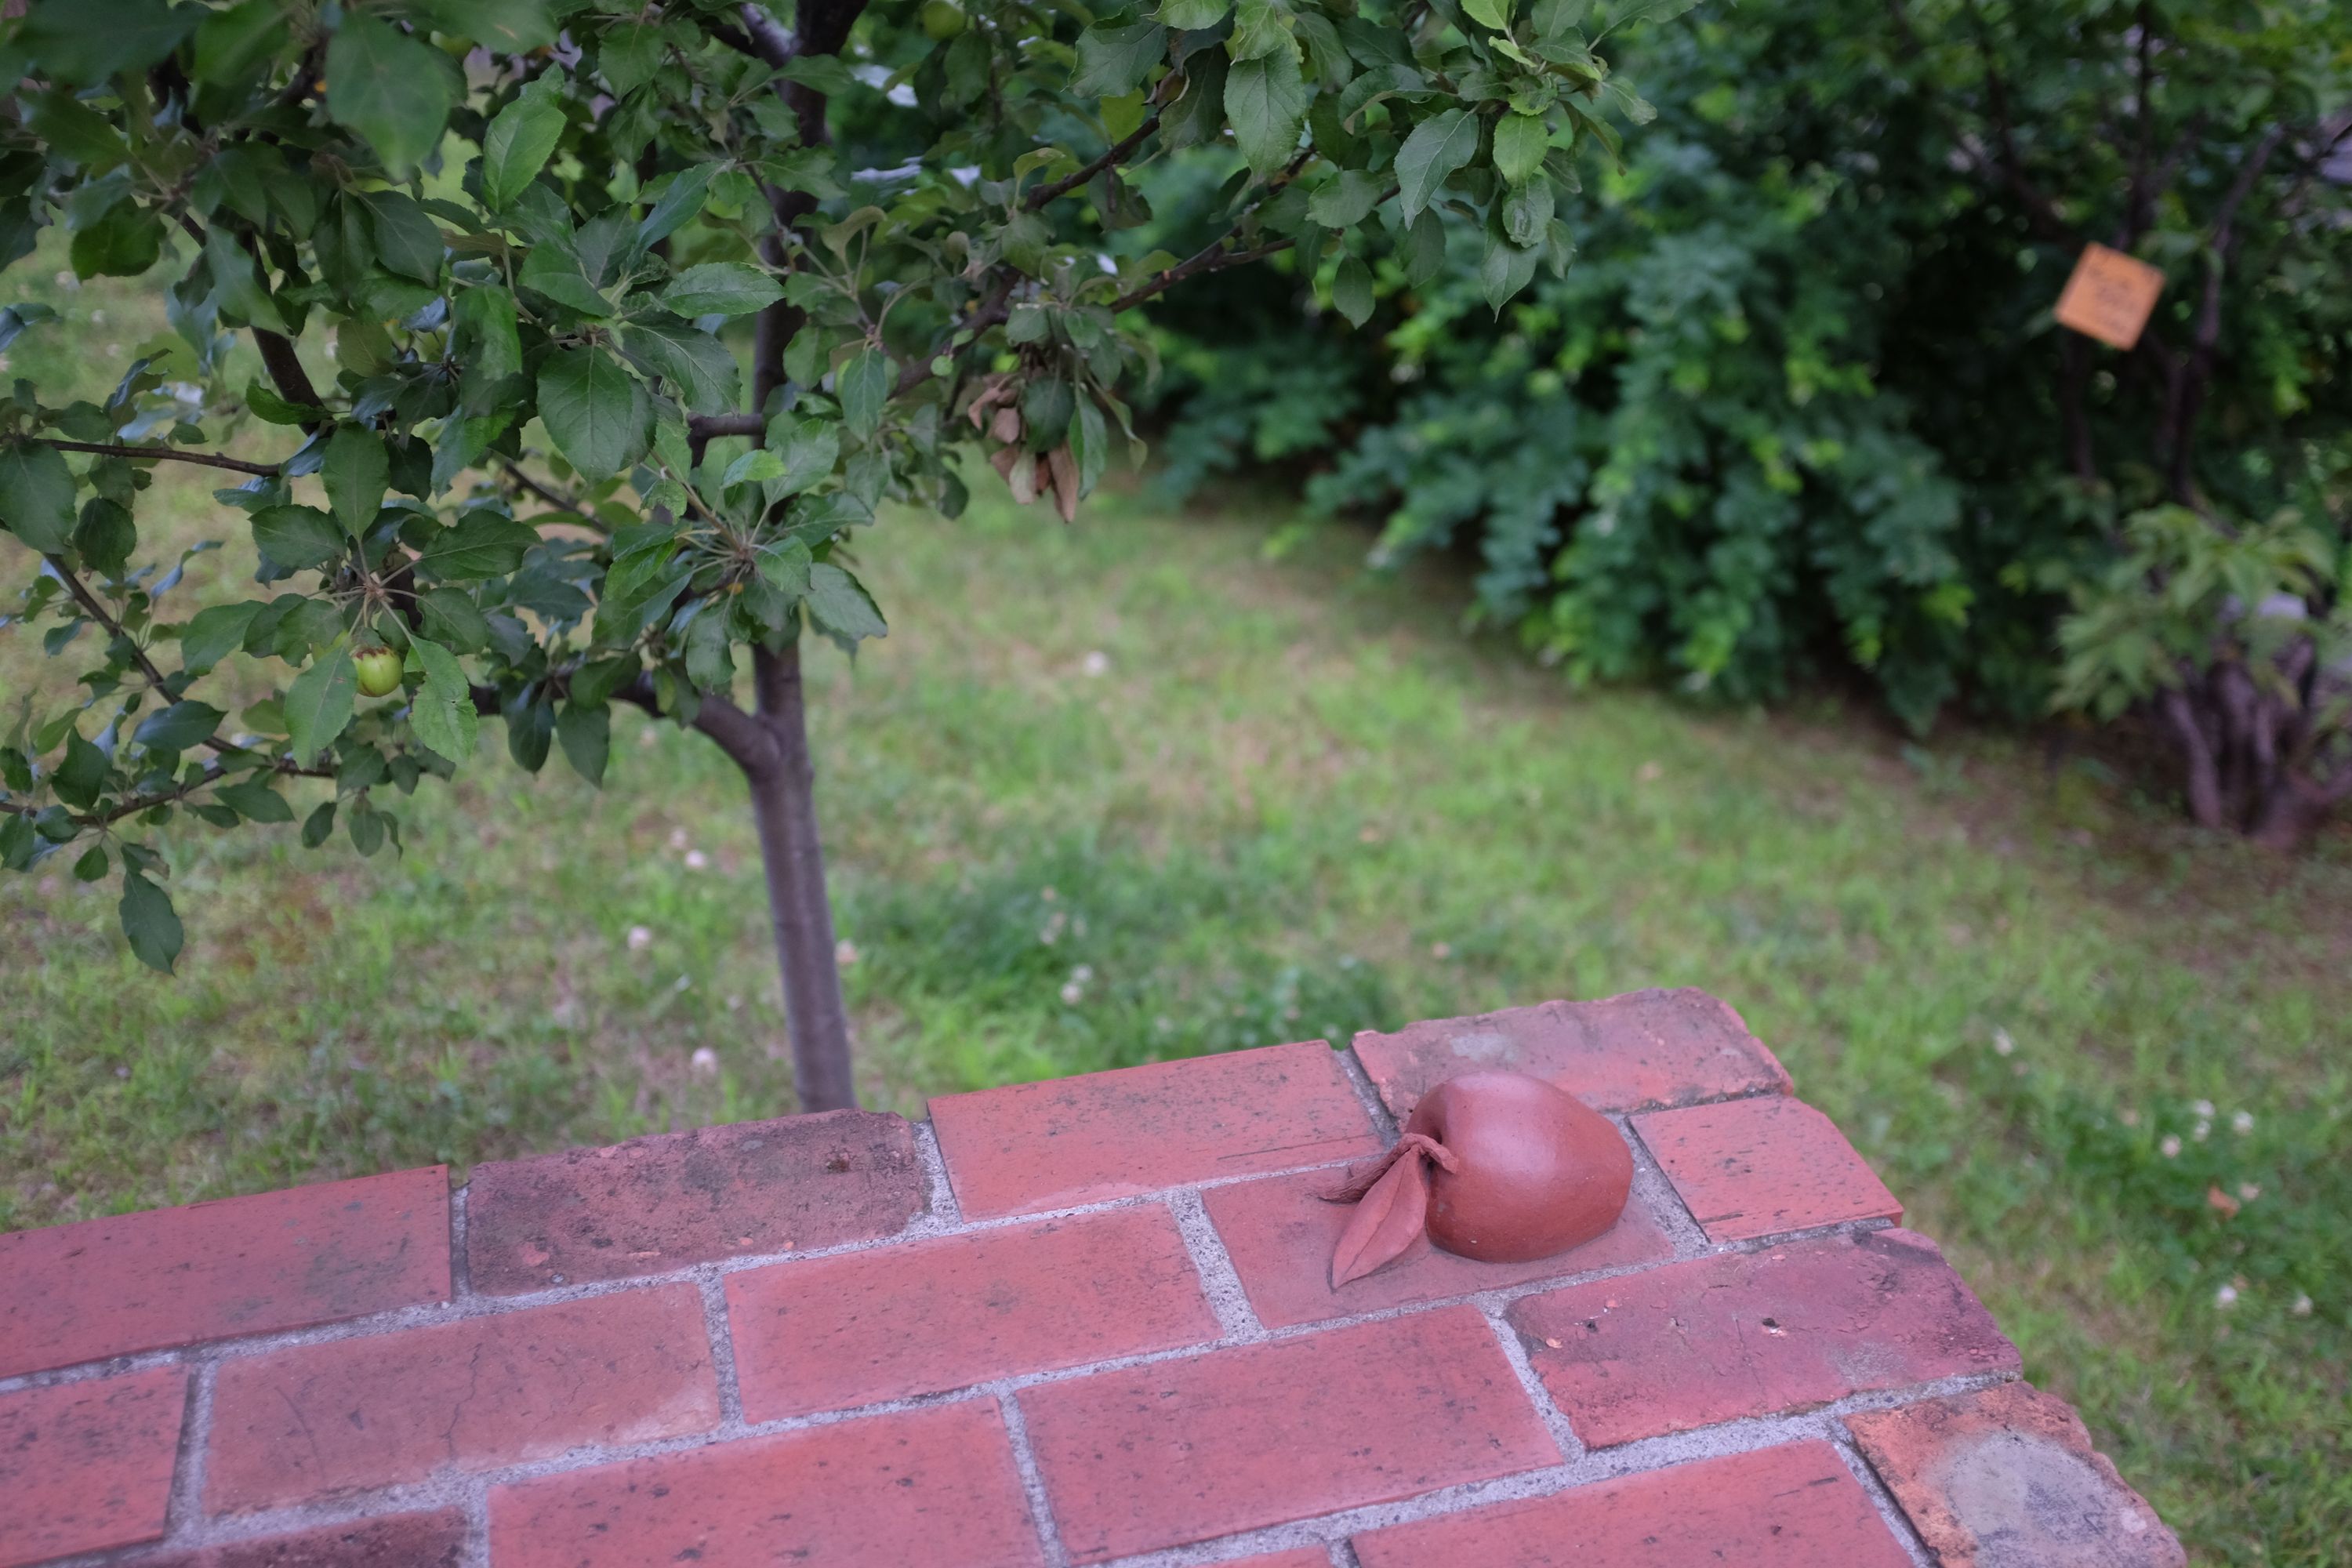 One of the bricks in a brick wall continues in a sculpted apple.